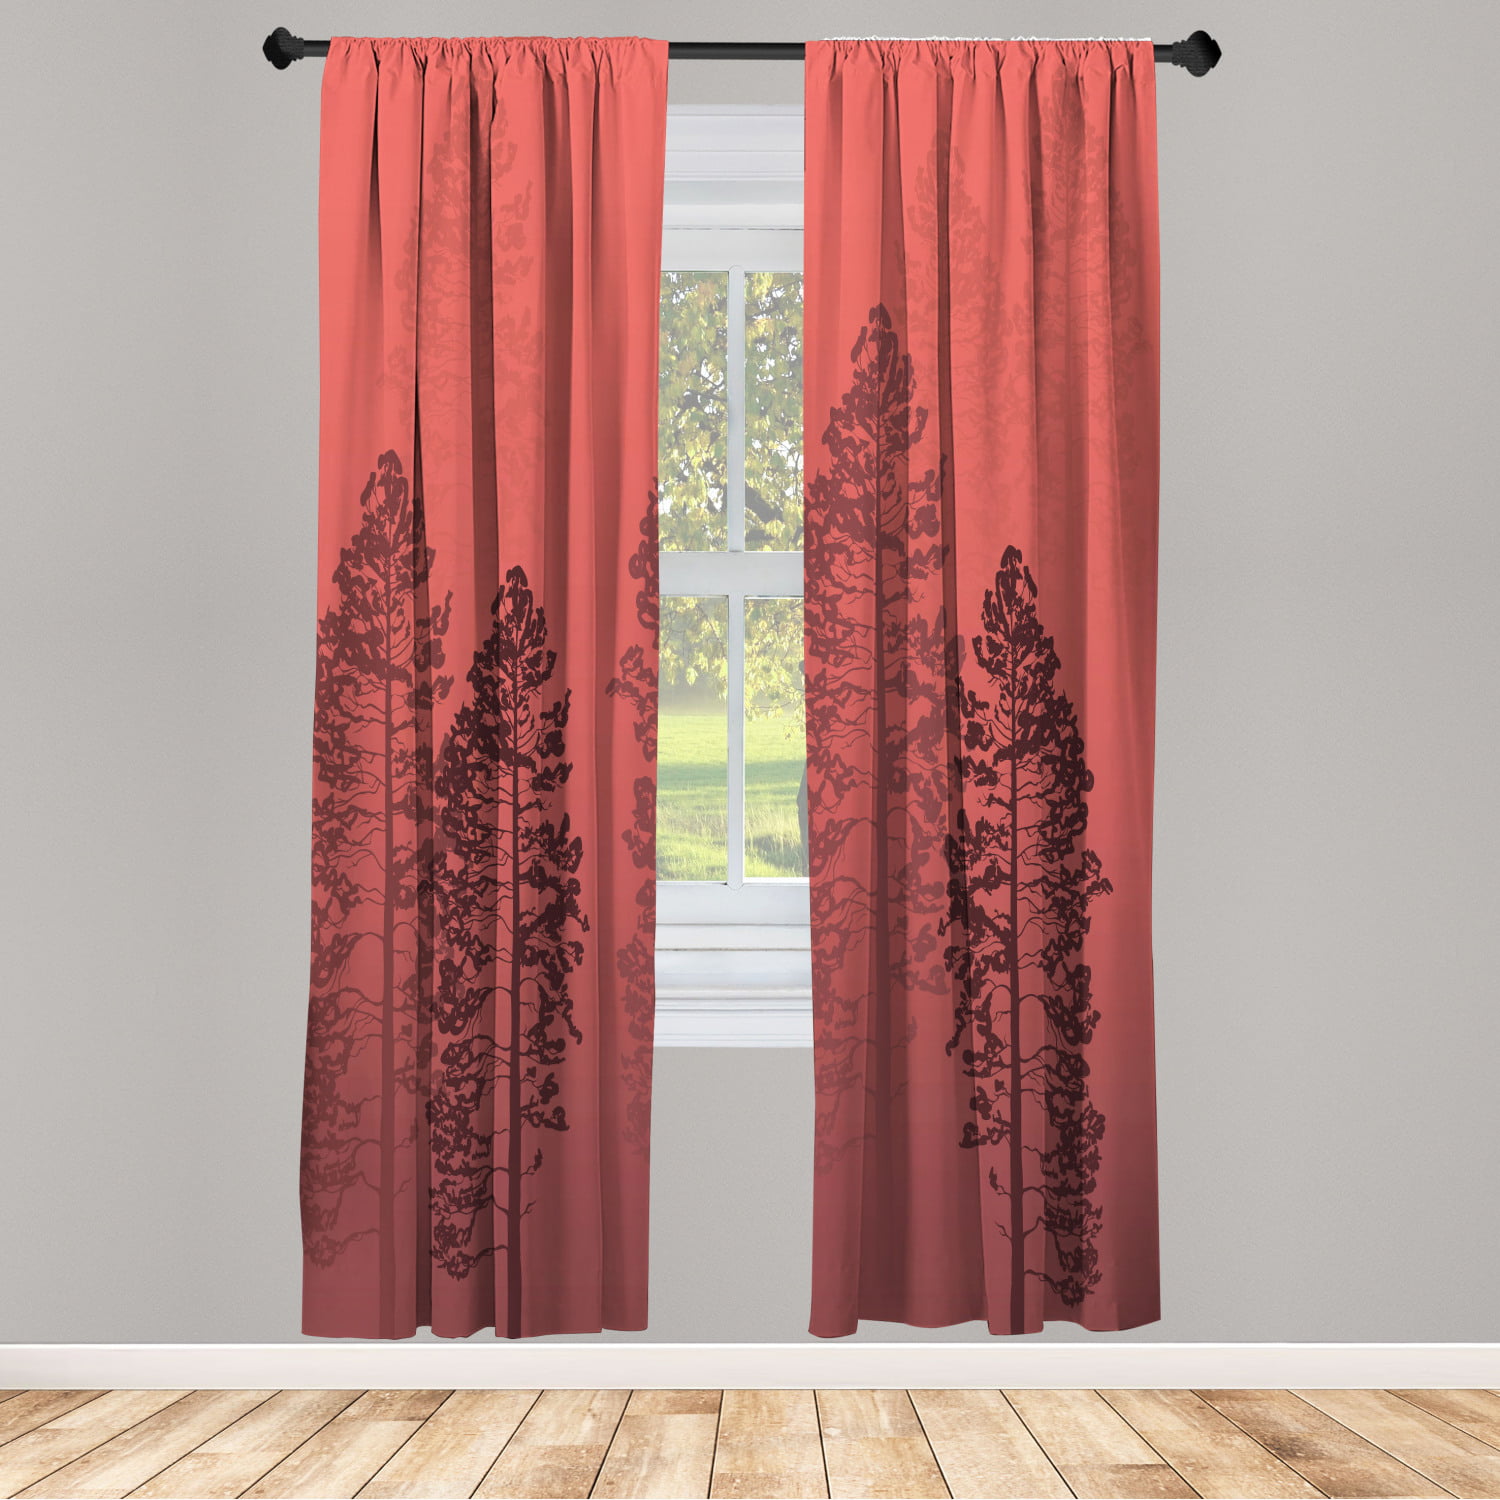 The Pioneer Woman Bandana 3-Piece Kitchen Curtain Tier and Valance Set Red 